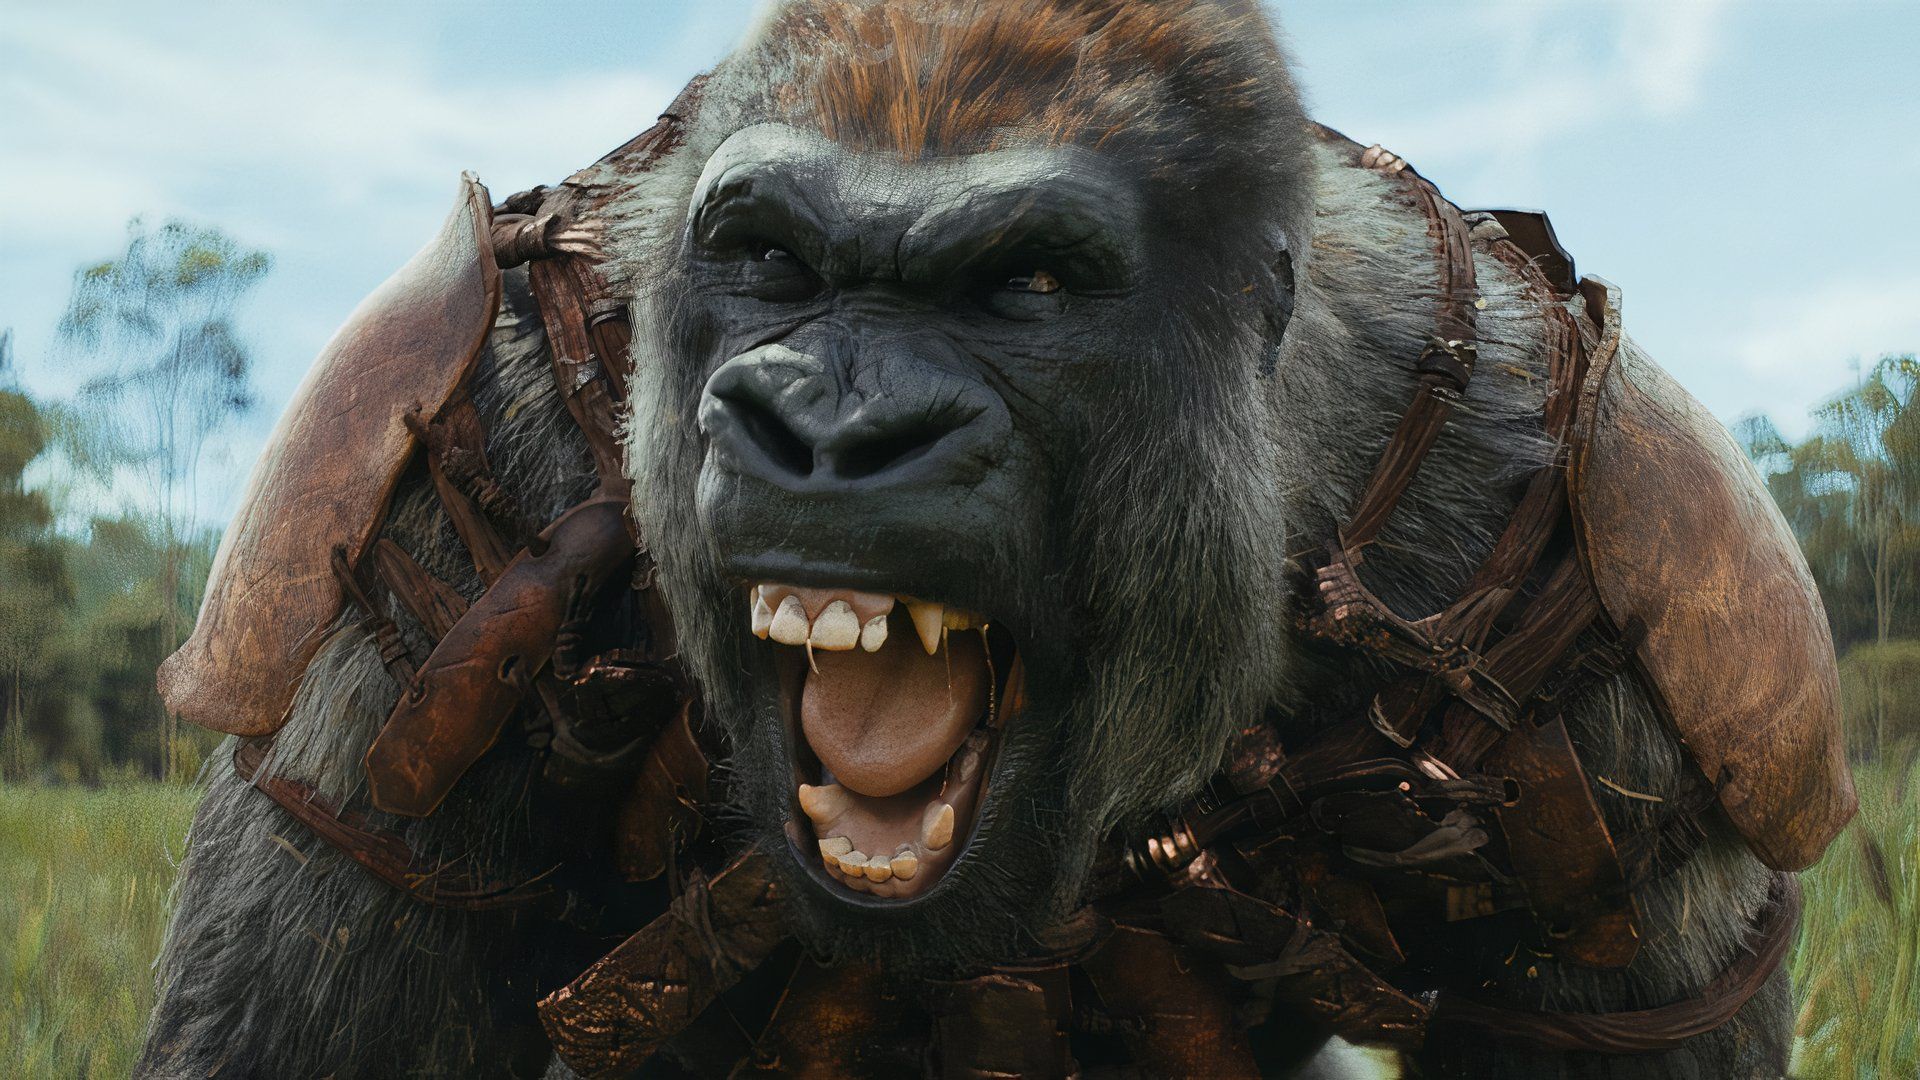 Proximus Caesar screams in Kingdom of the Planet of the Apes